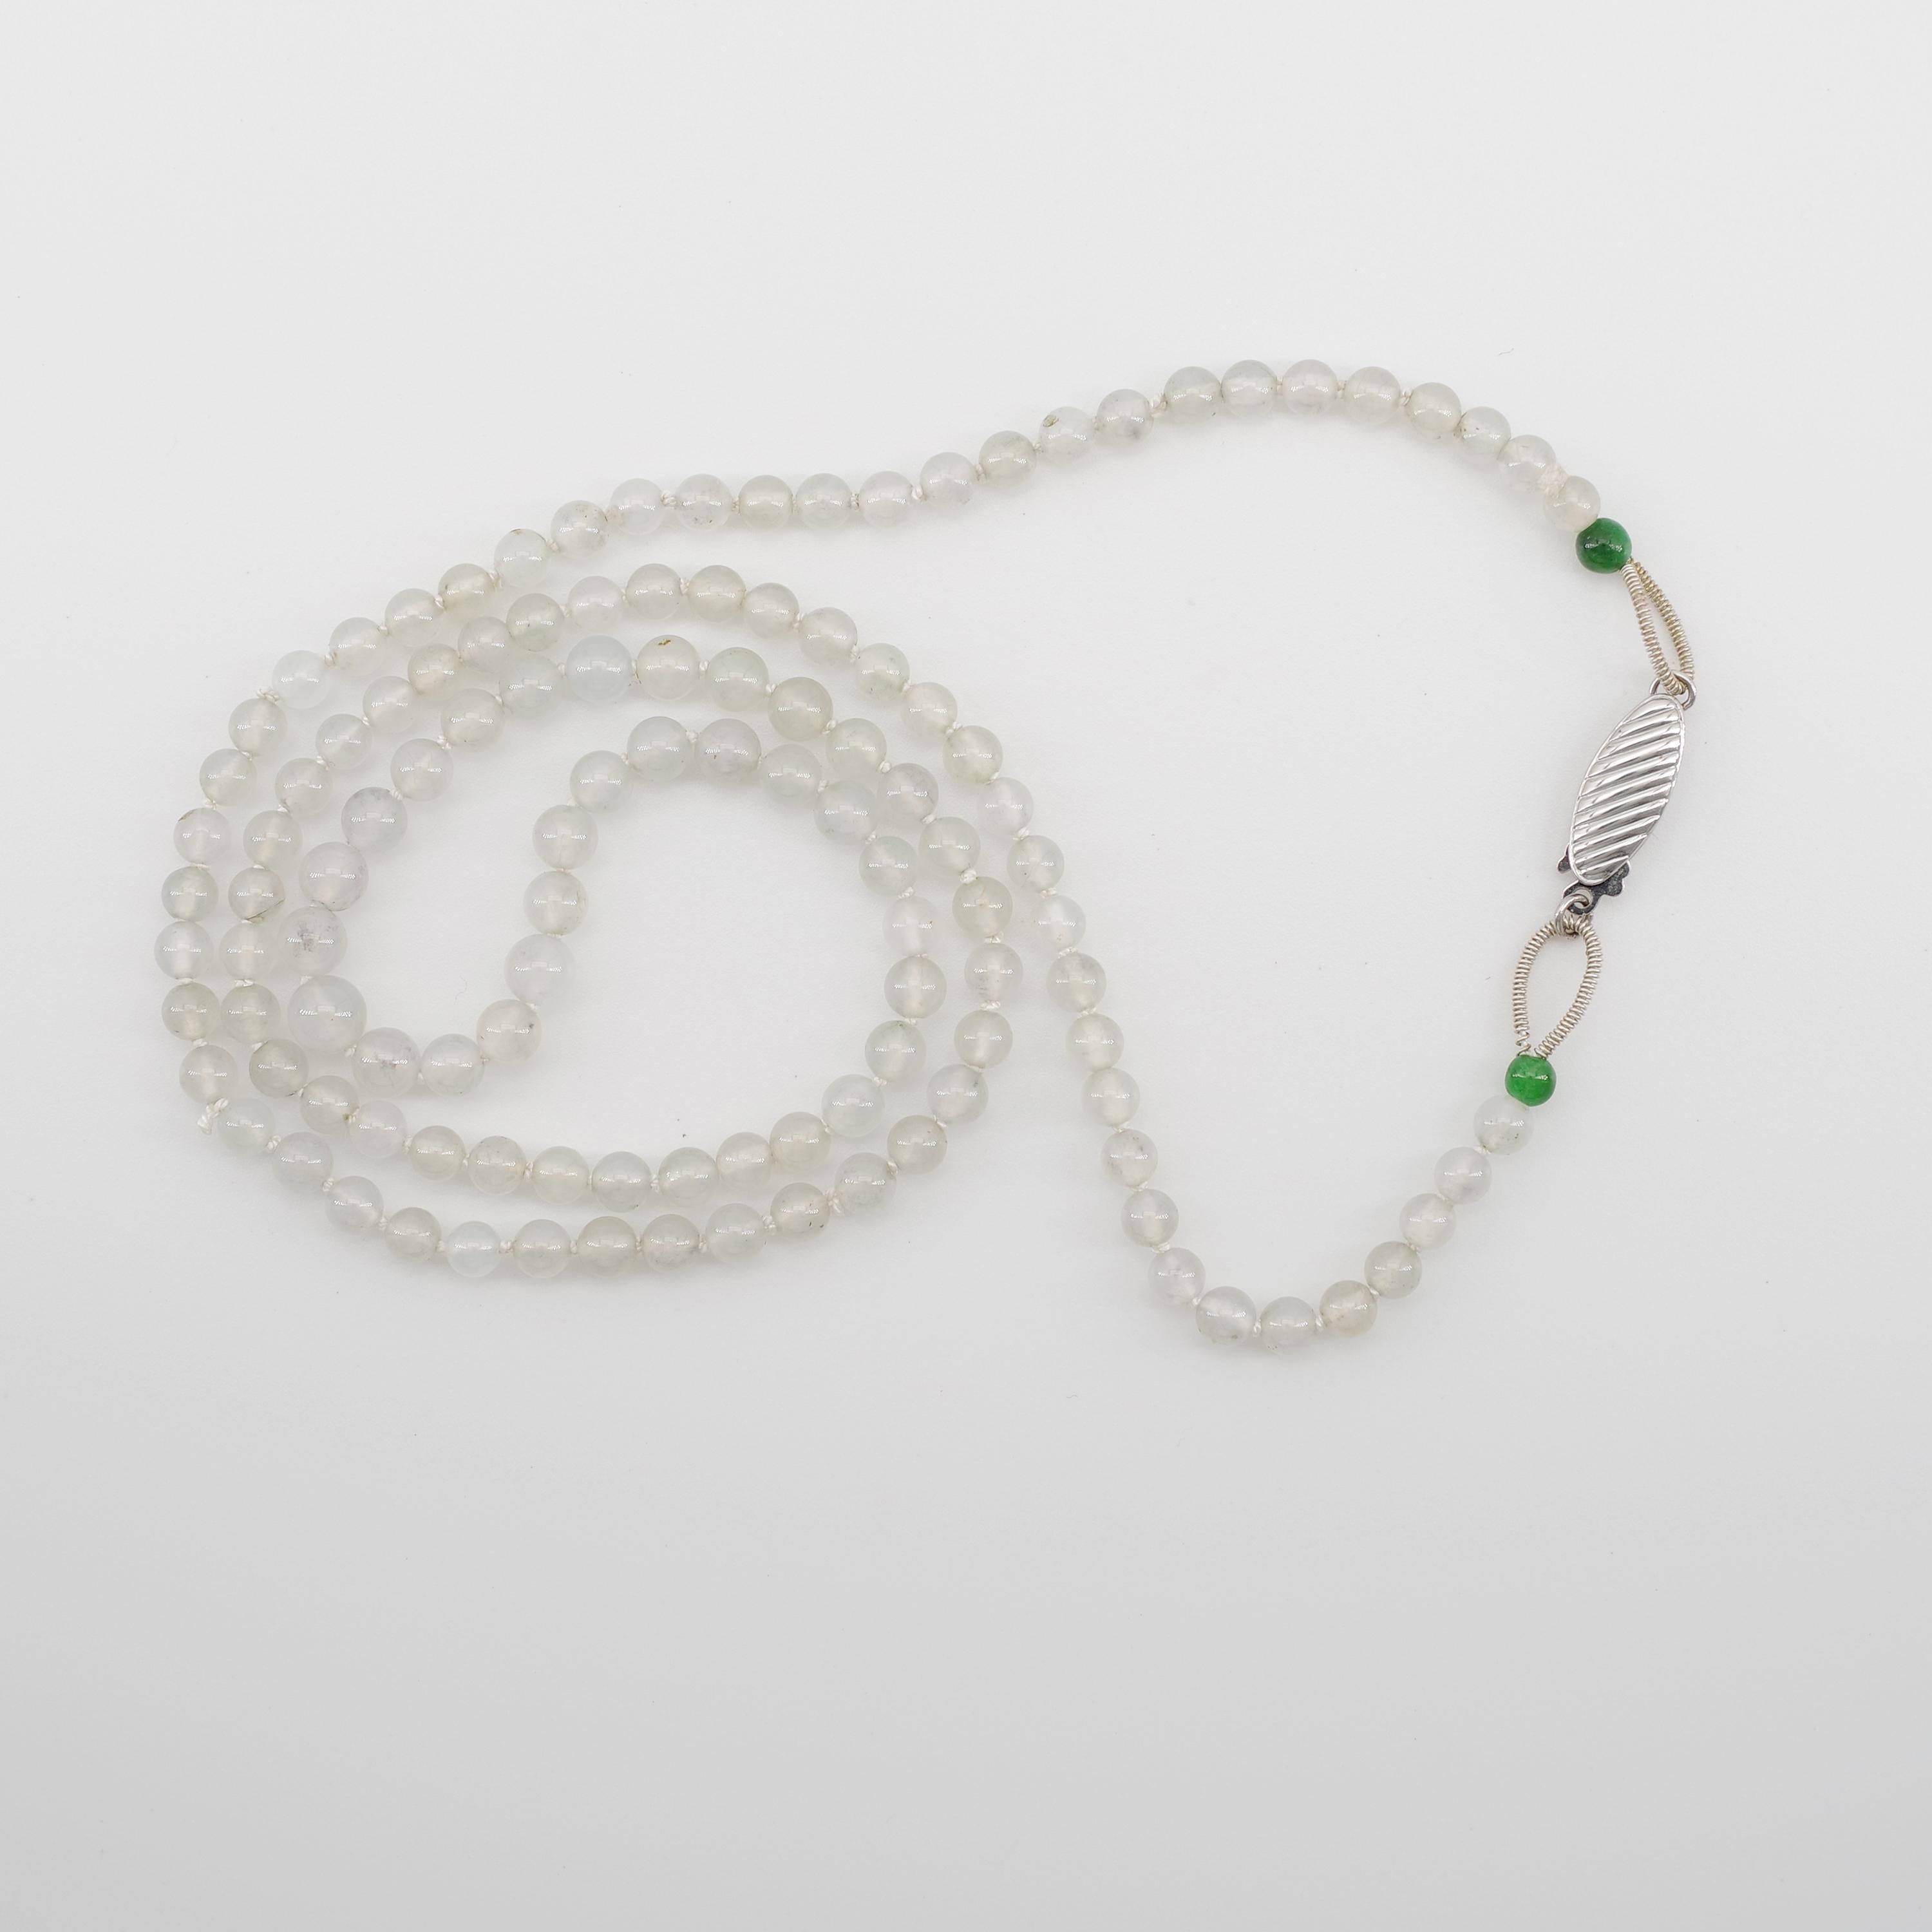 Certified Untreated Glassy and Imperial Jade Necklace with Platinum Clasp 1